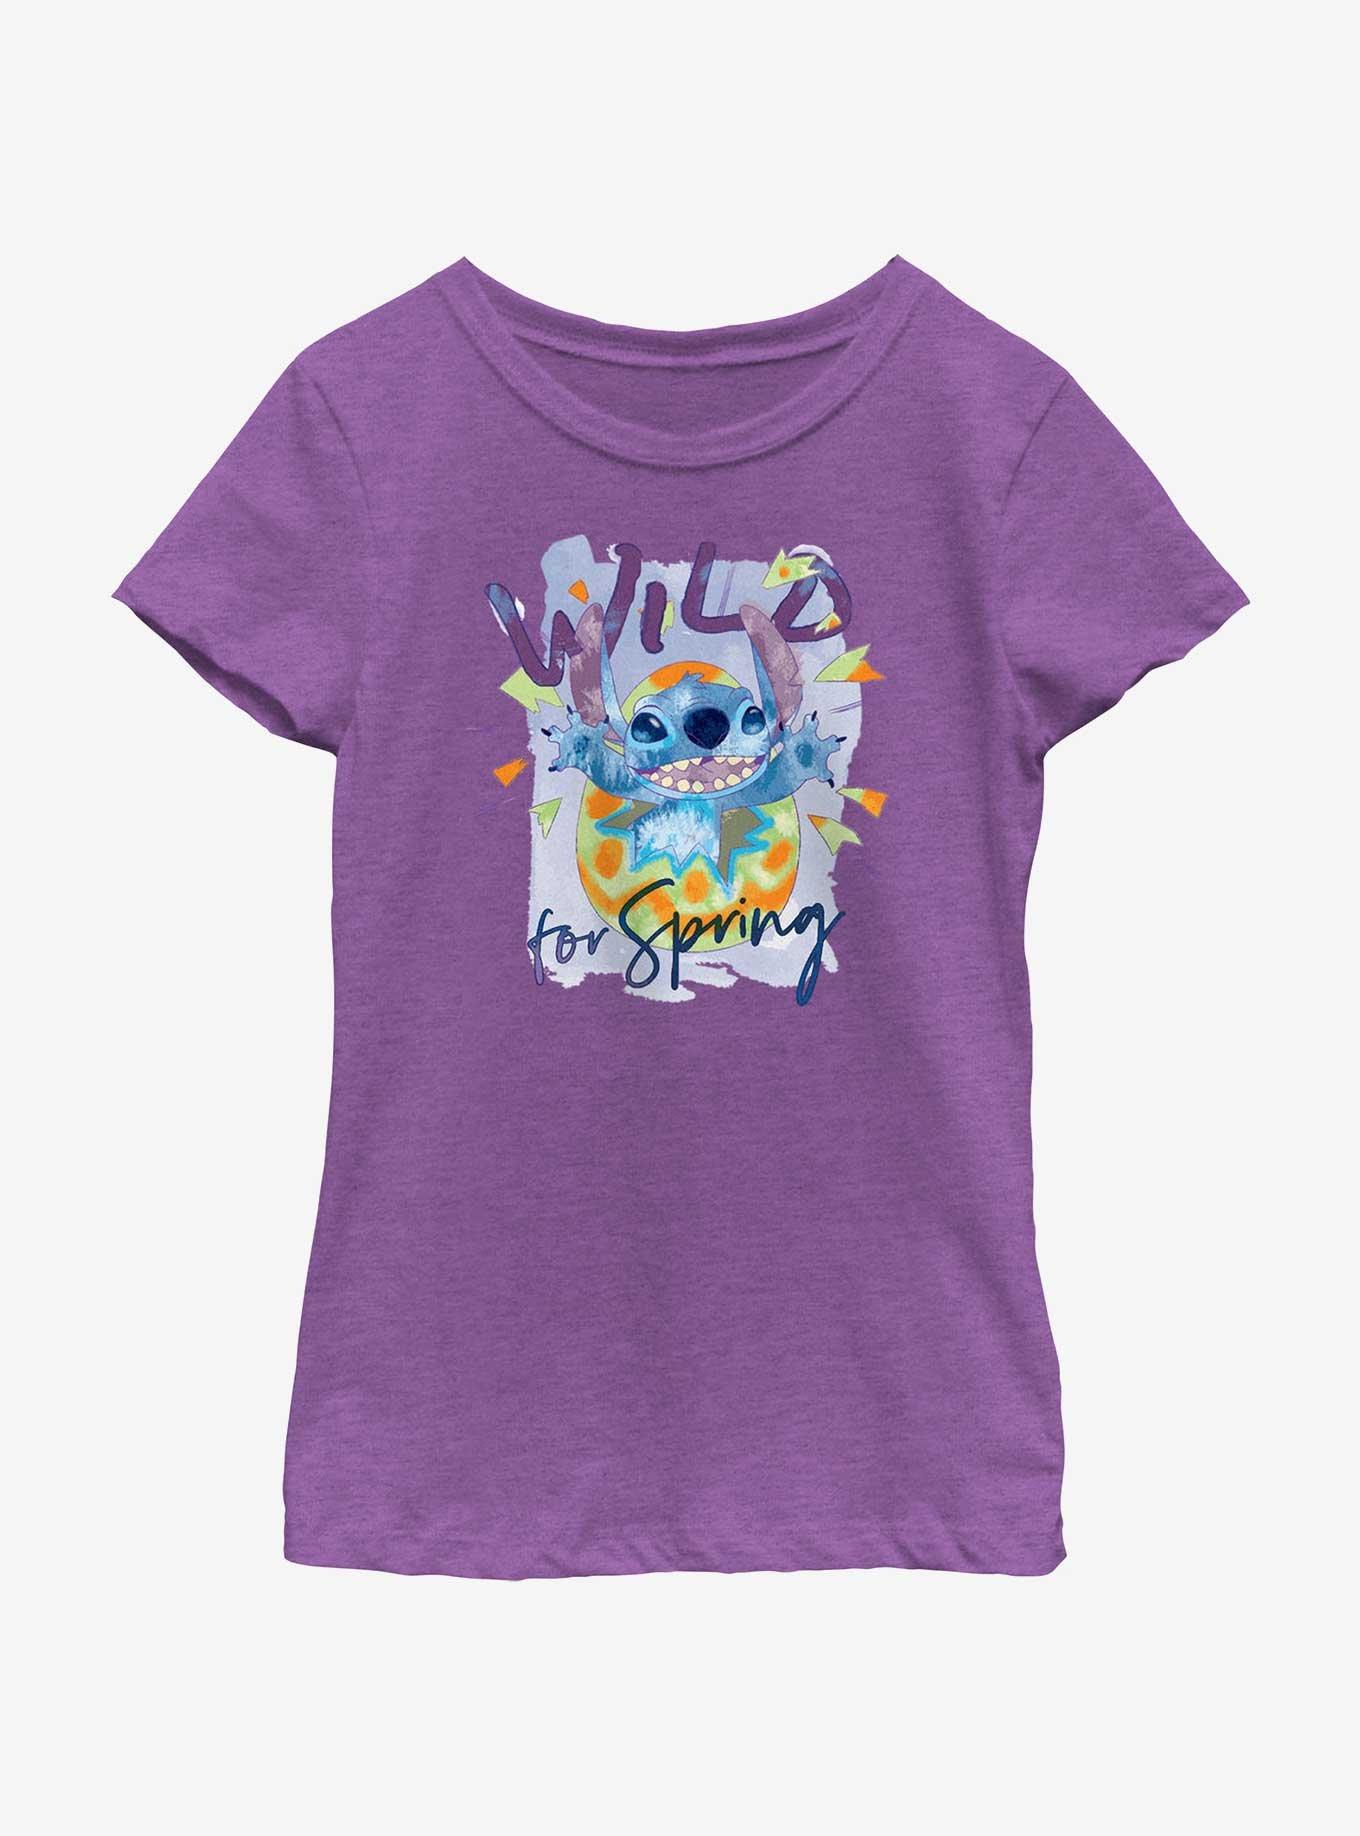 Disney Lilo & Stitch Wild For Spring Youth Girls T-Shirt, PURPLE BERRY, hi-res